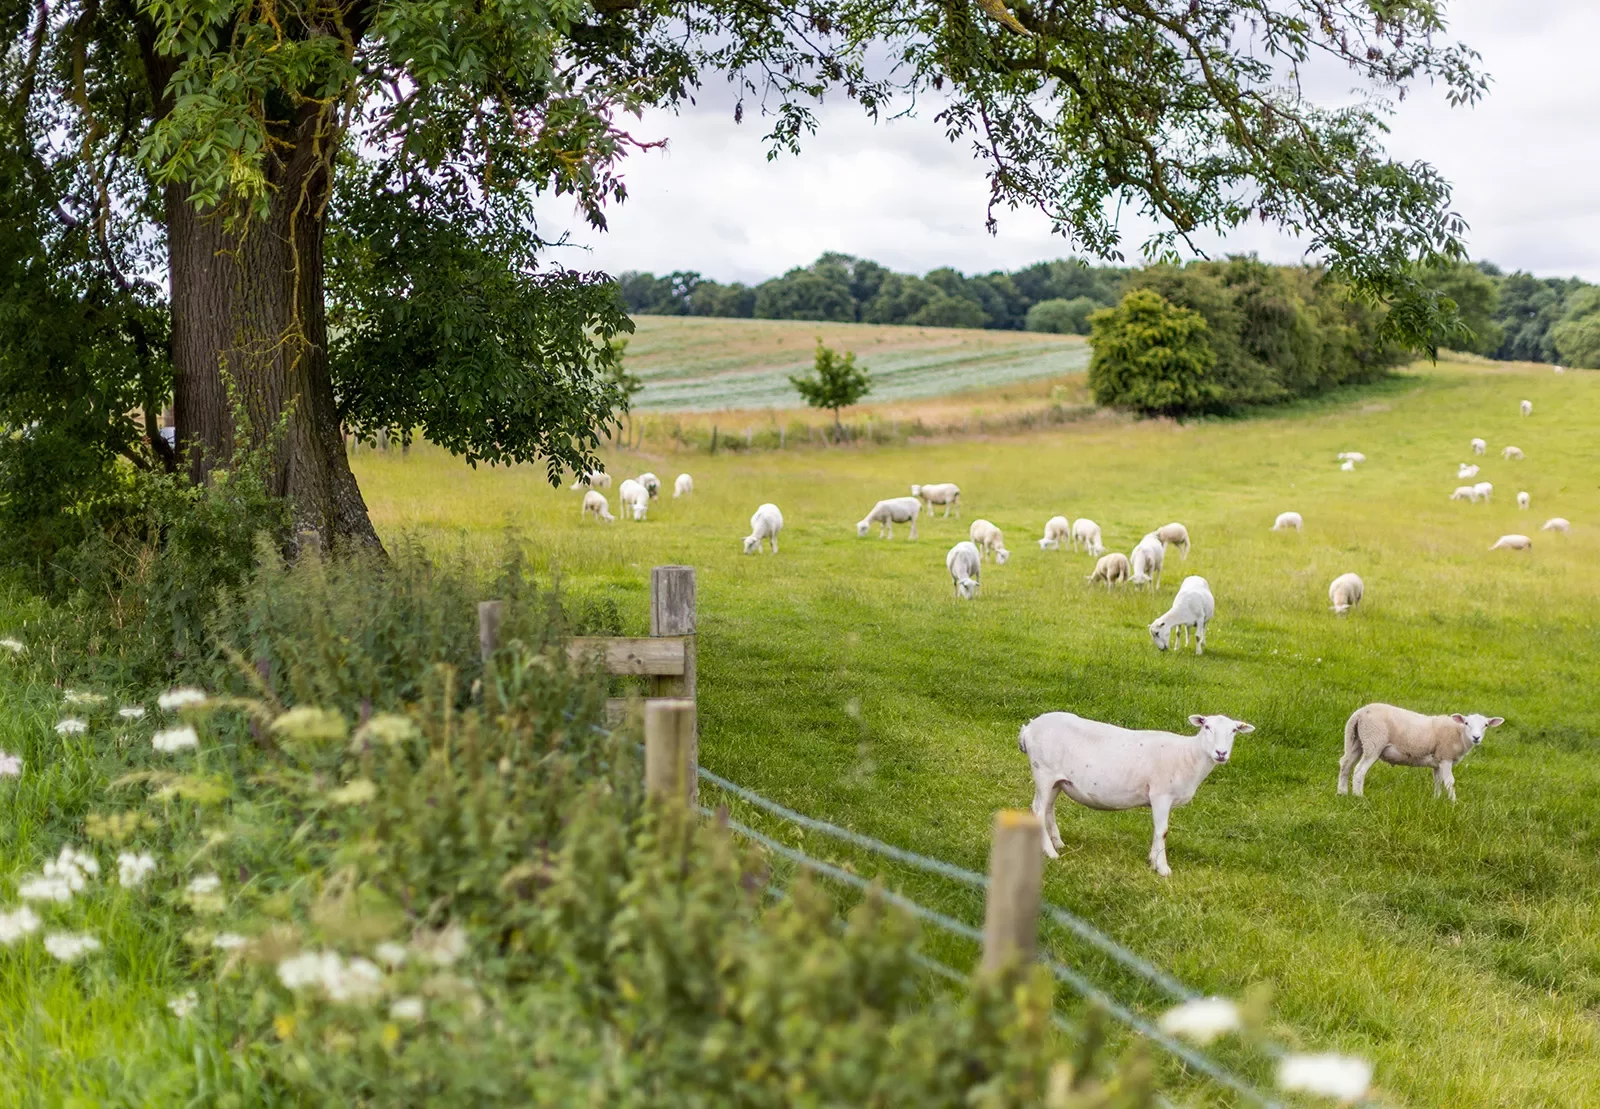 Newly sheared sheep in an English pasture.